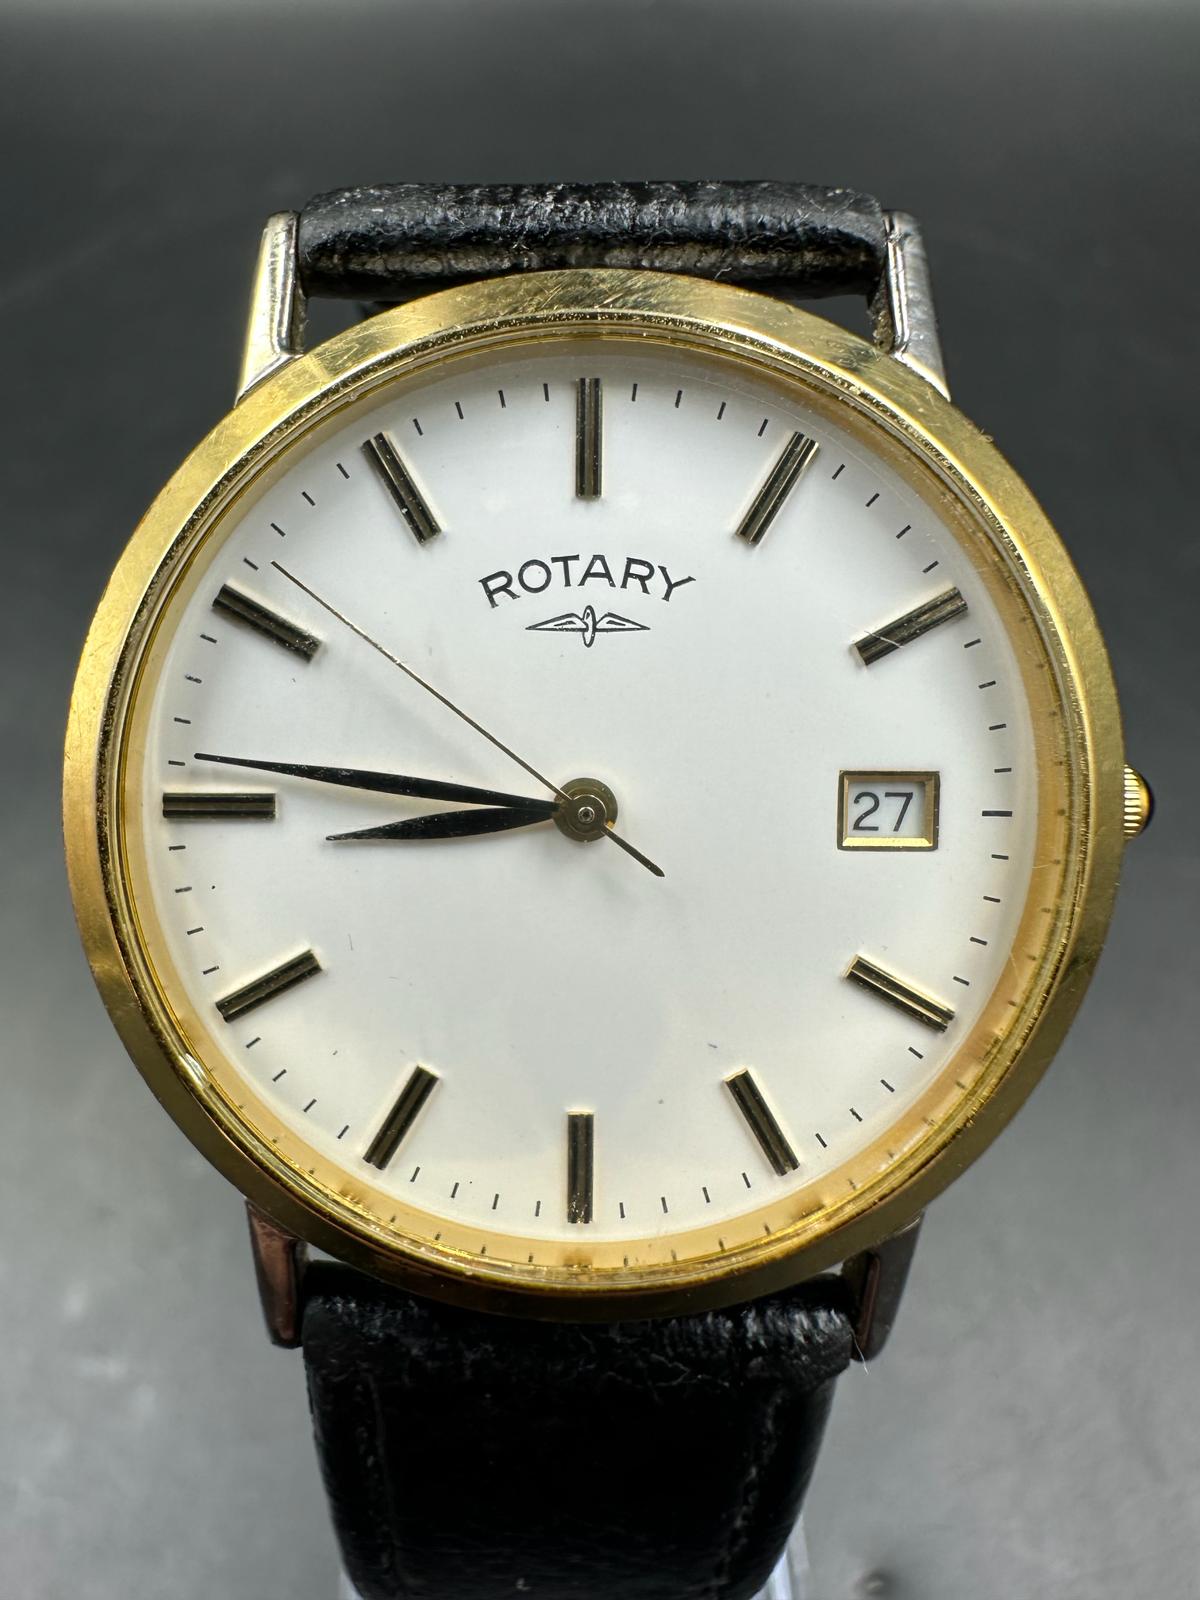 A Rotary wristwatch on leather strap, gold plated, model reference number 4990 UCAR 364 - Image 5 of 6